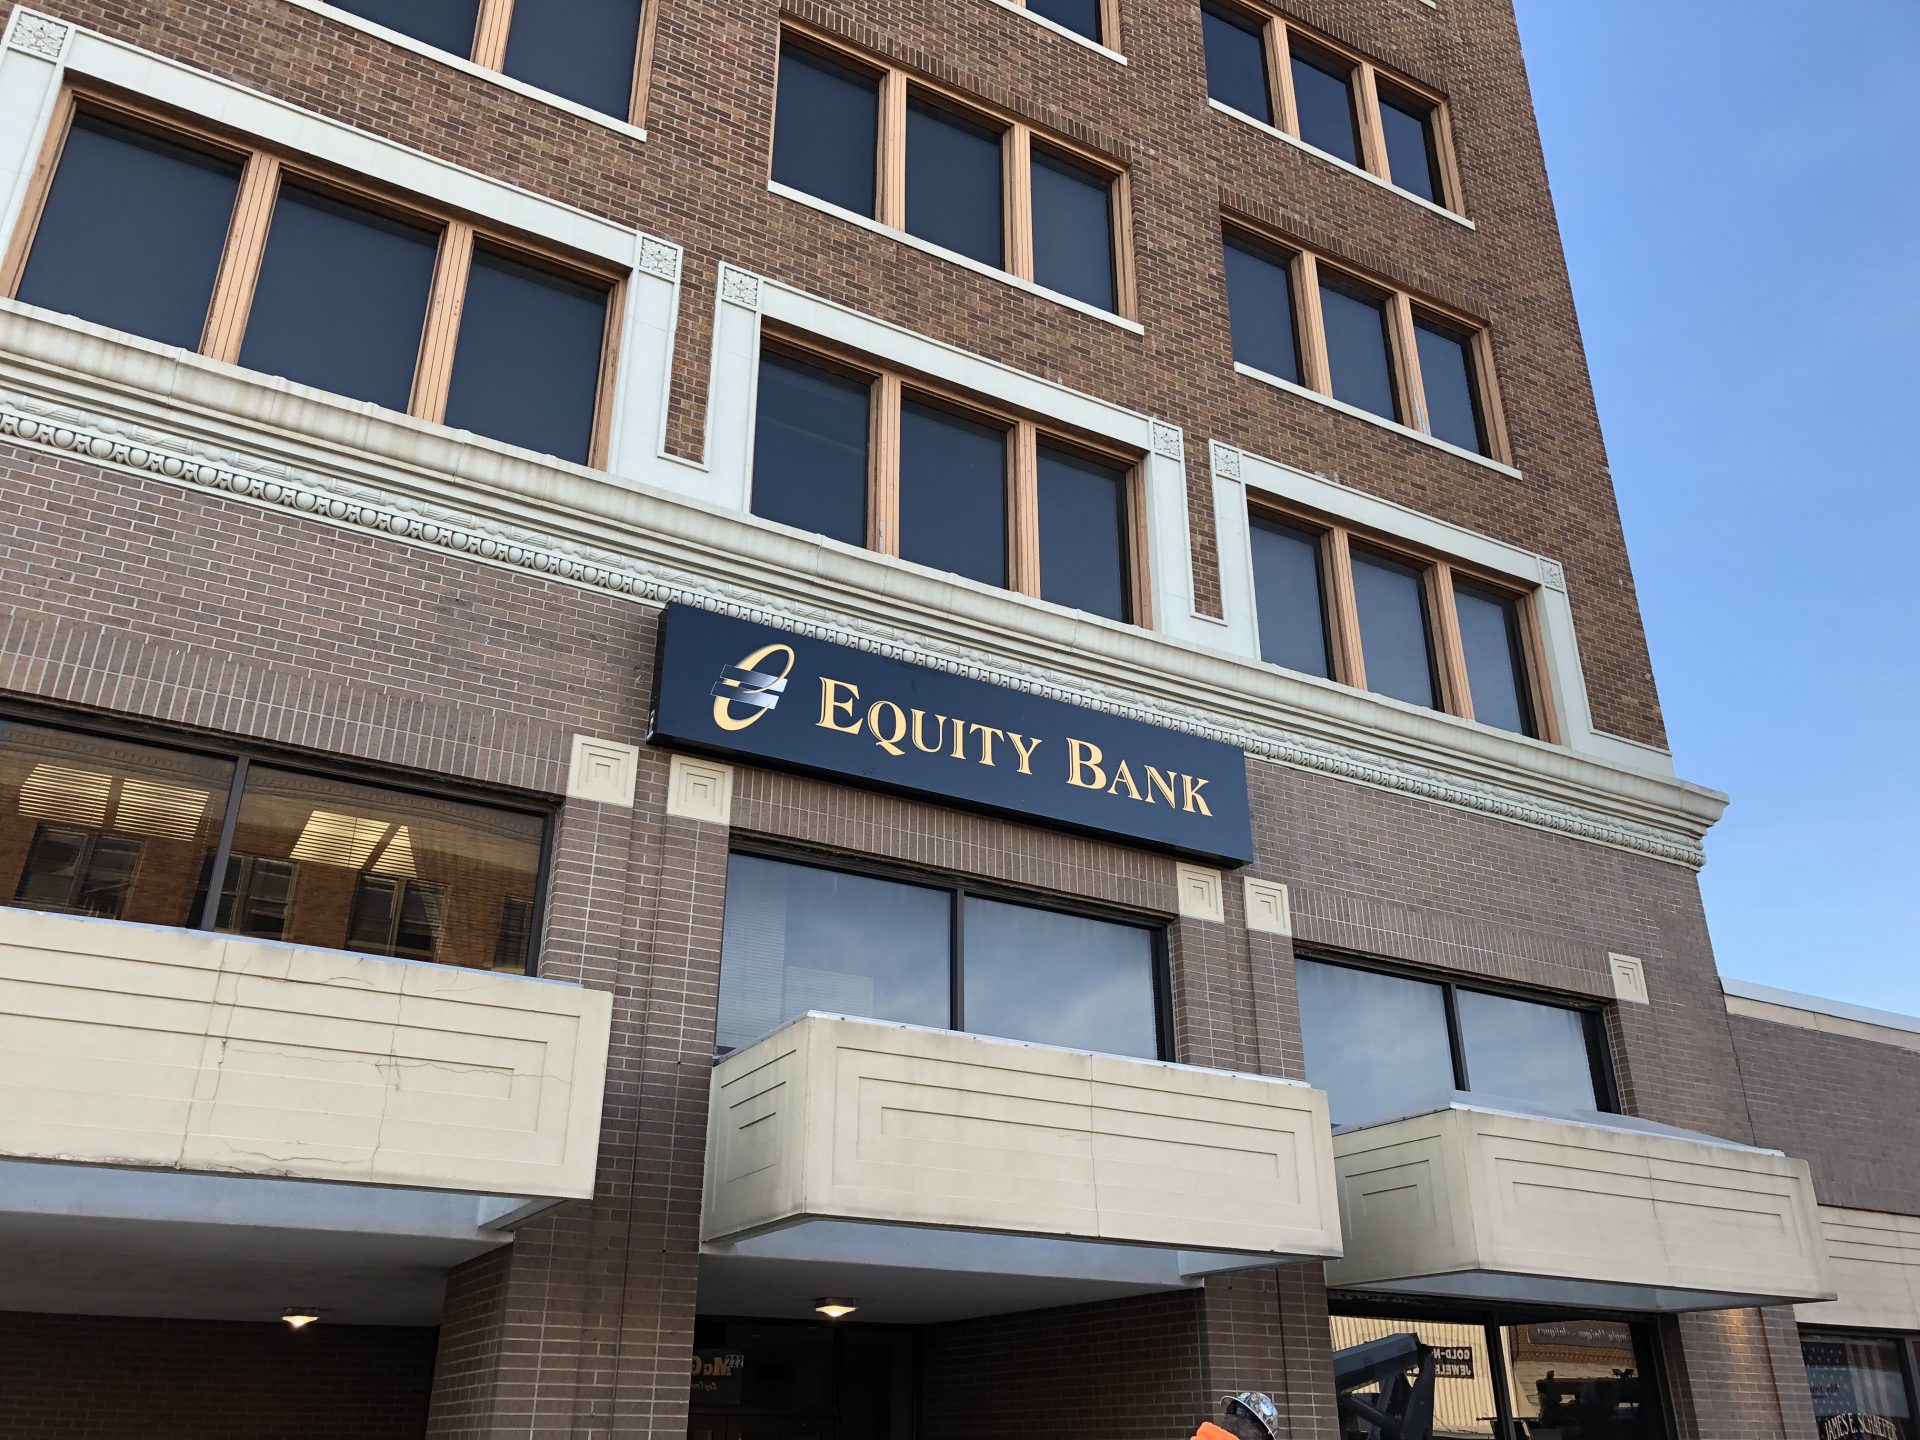 Equity Bank Ponca City Downtown branch exterior.